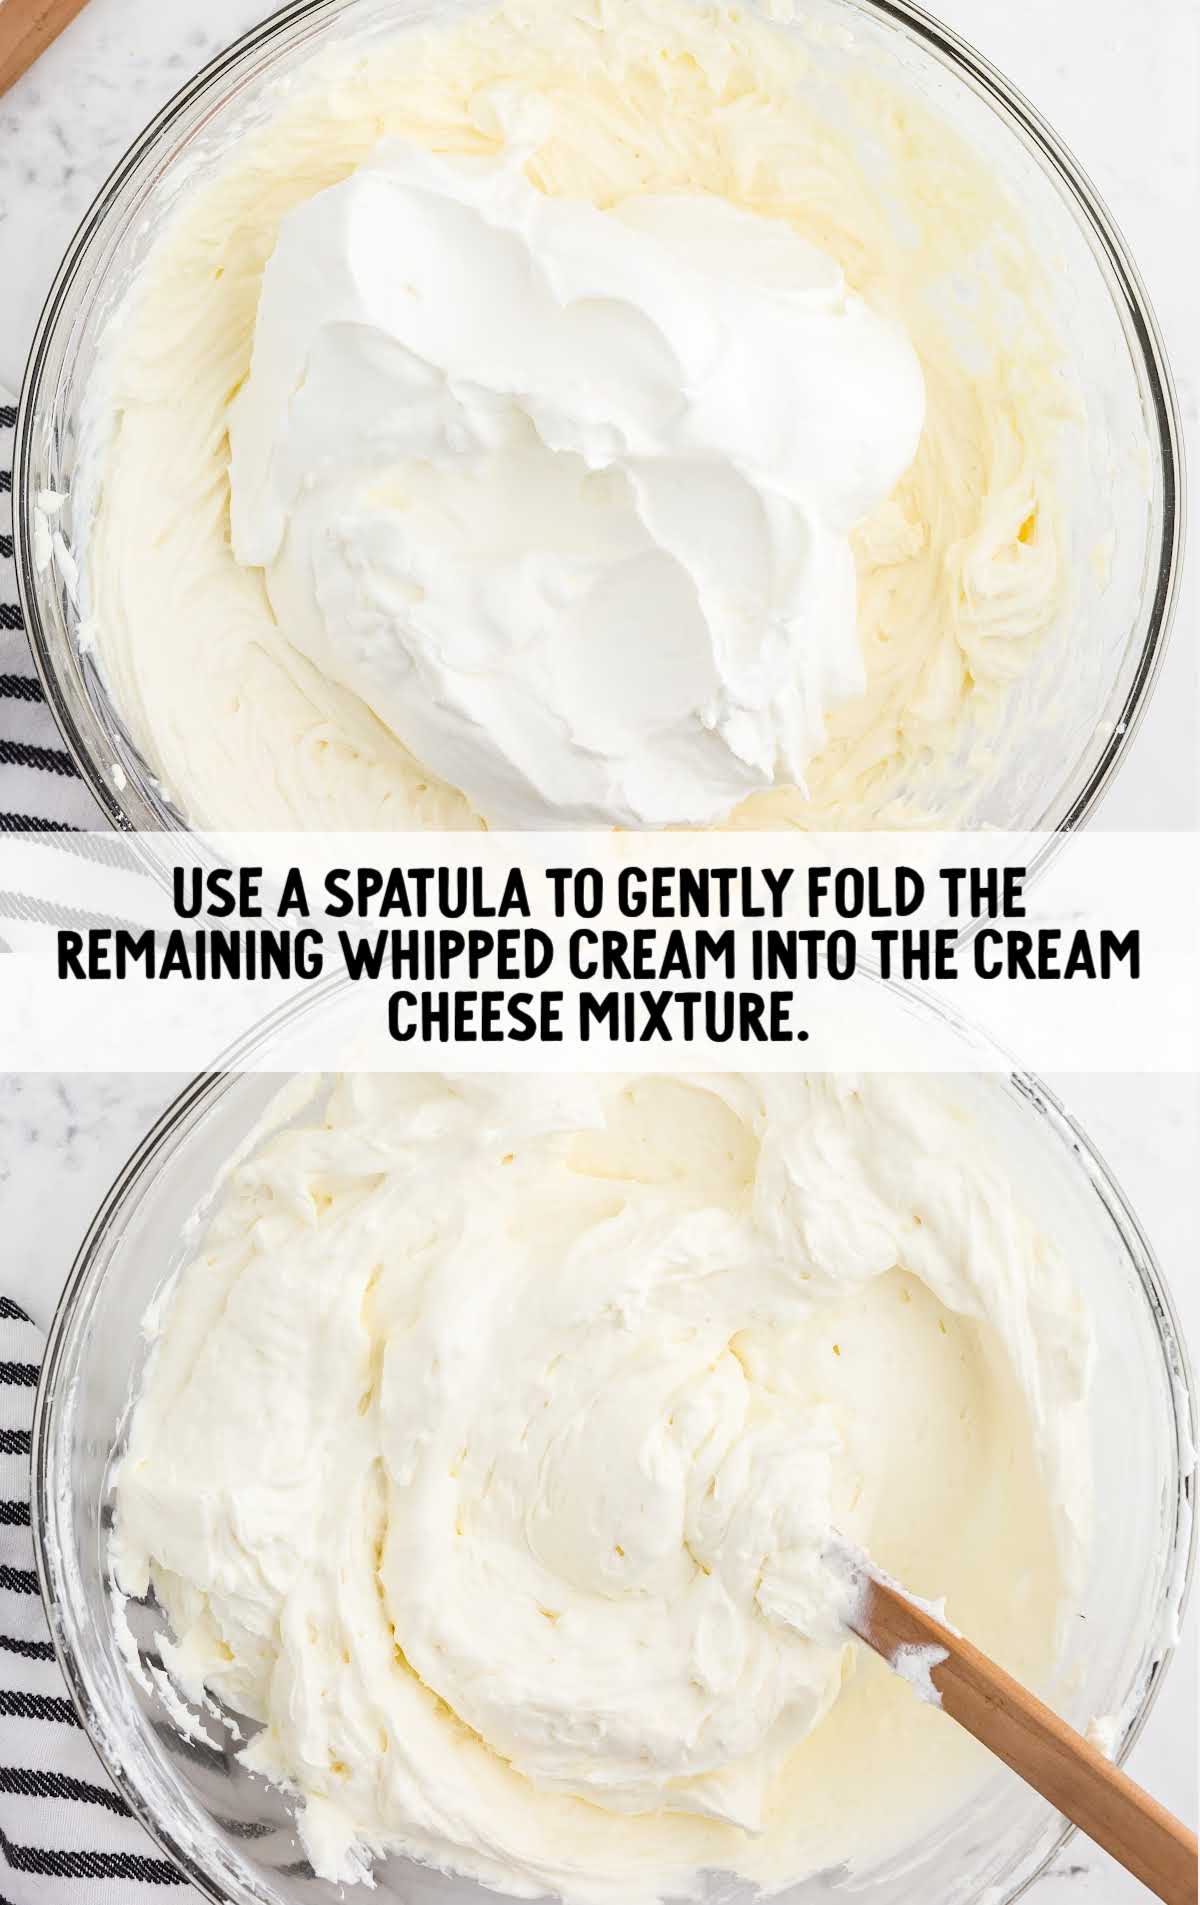 whipped cream folded into the cream cheese mixture in a bowl